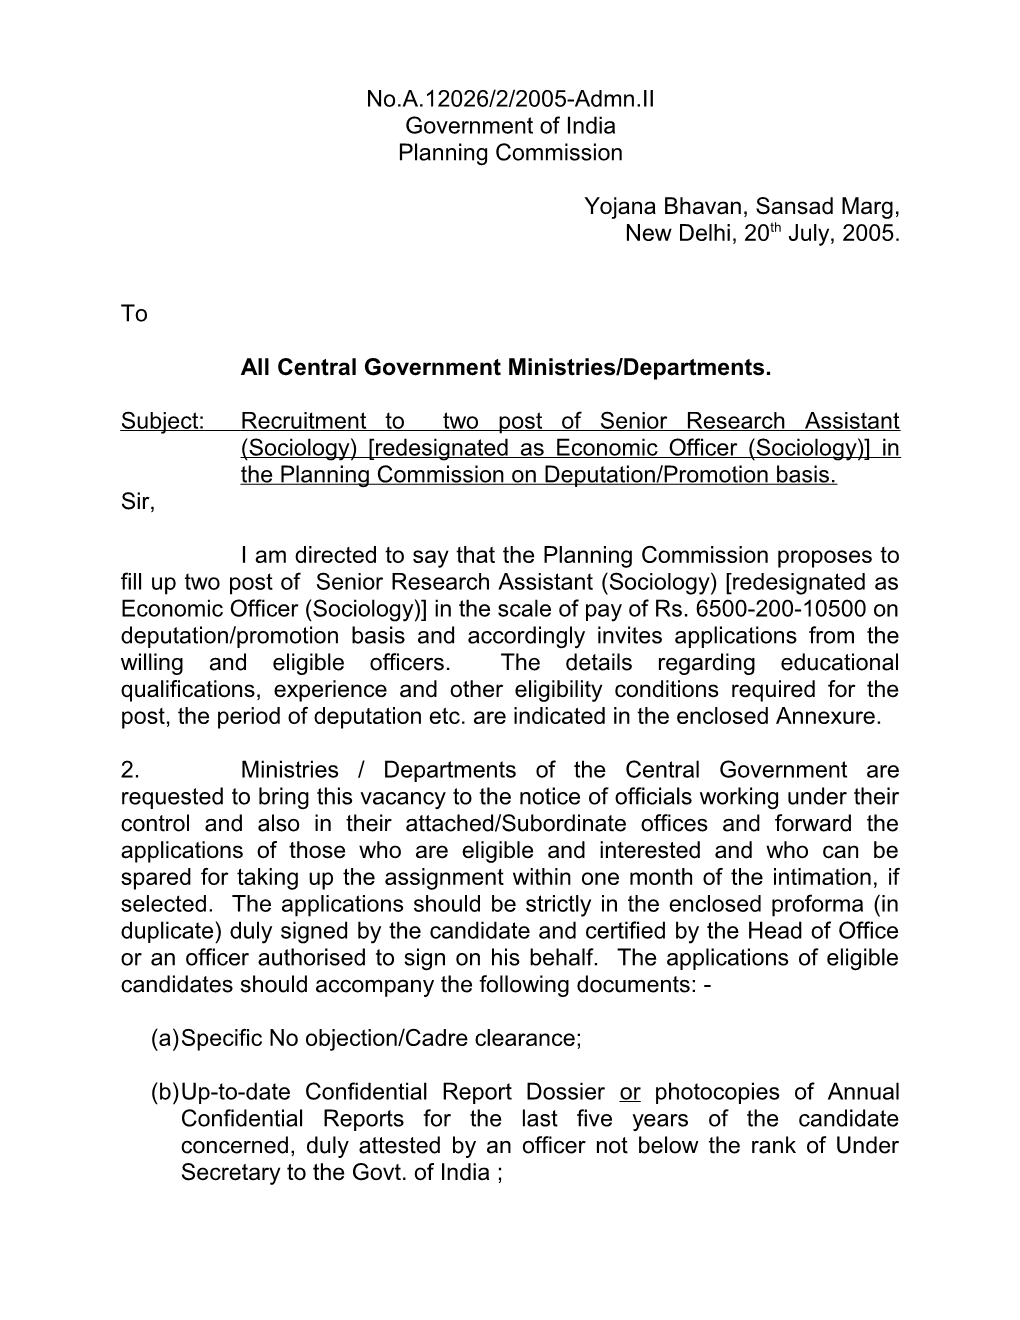 All Central Government Ministries/Departments